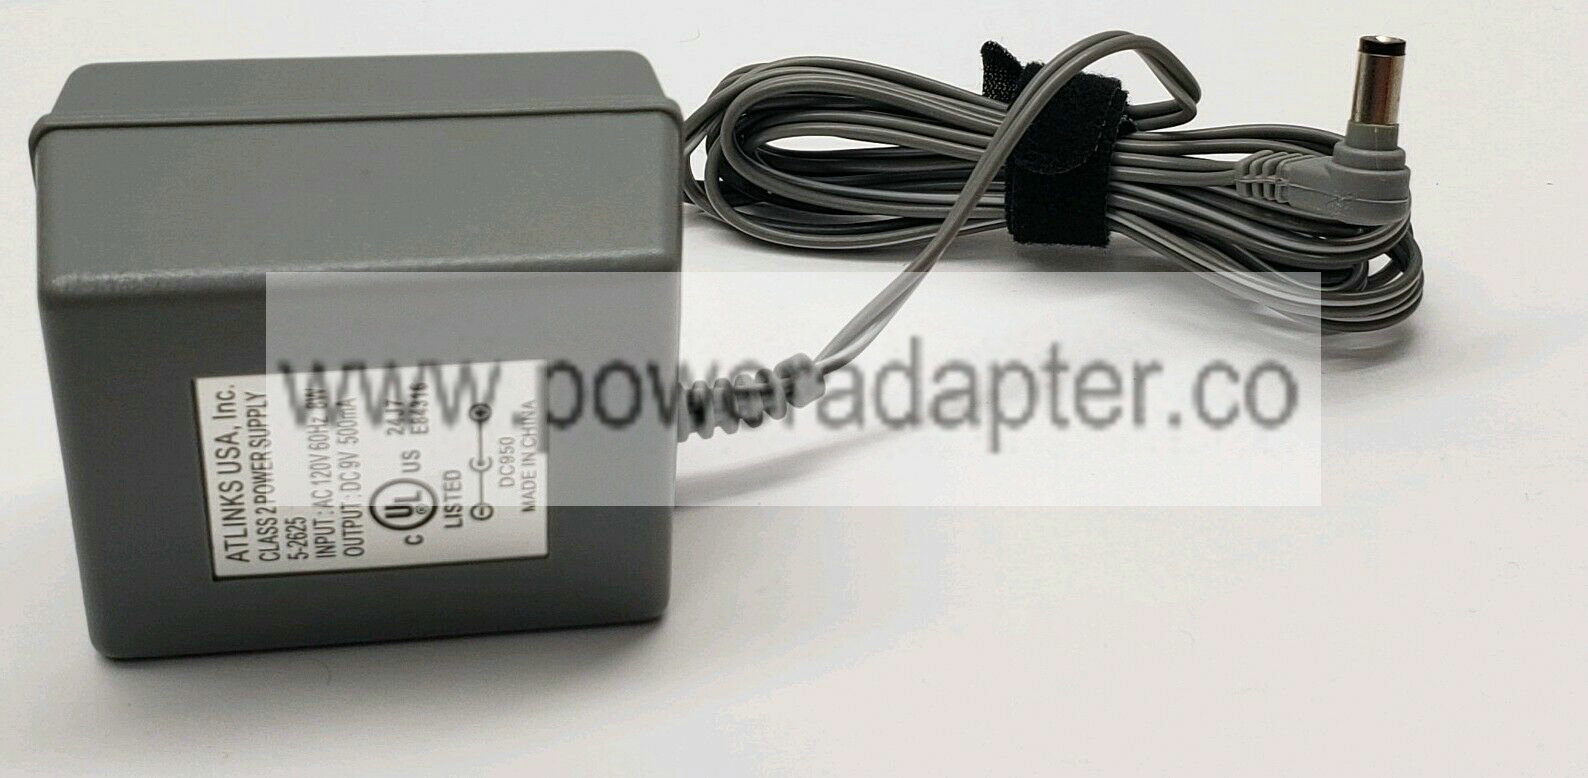 Atlinks 5-2625 AC Power Supply Adapter Charger Output: 9V 500mA Tested Works Brand: Atlinks Country/Region of Manuf - Click Image to Close